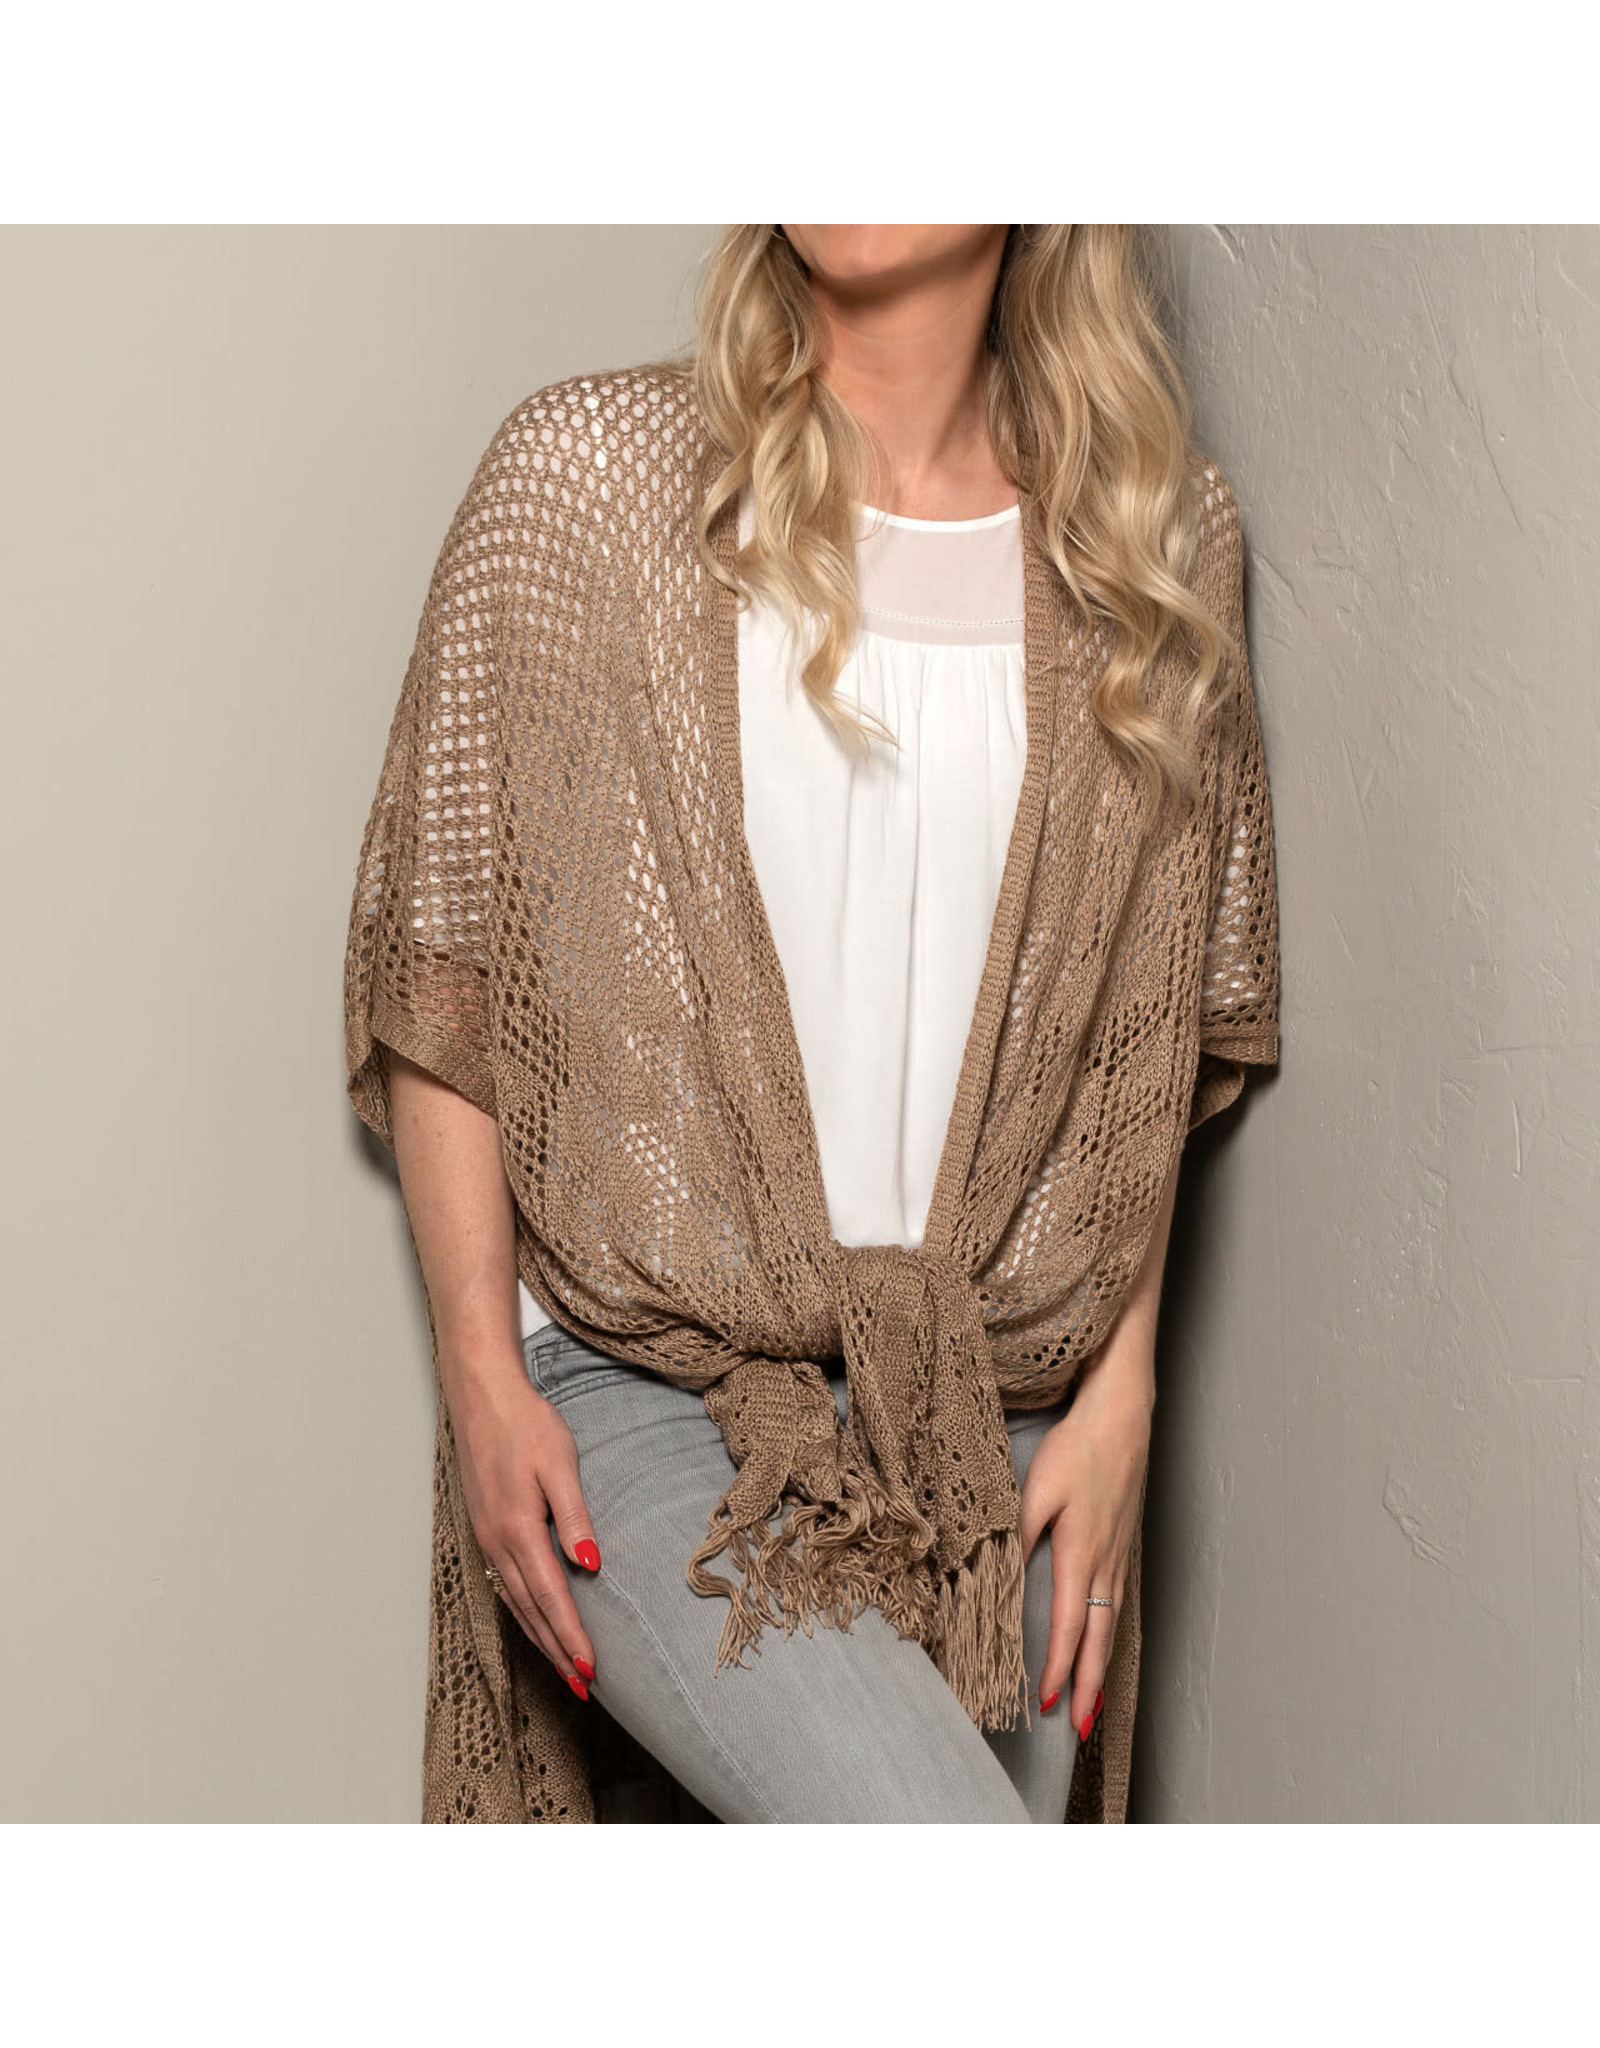 Crochet Taupe Duster